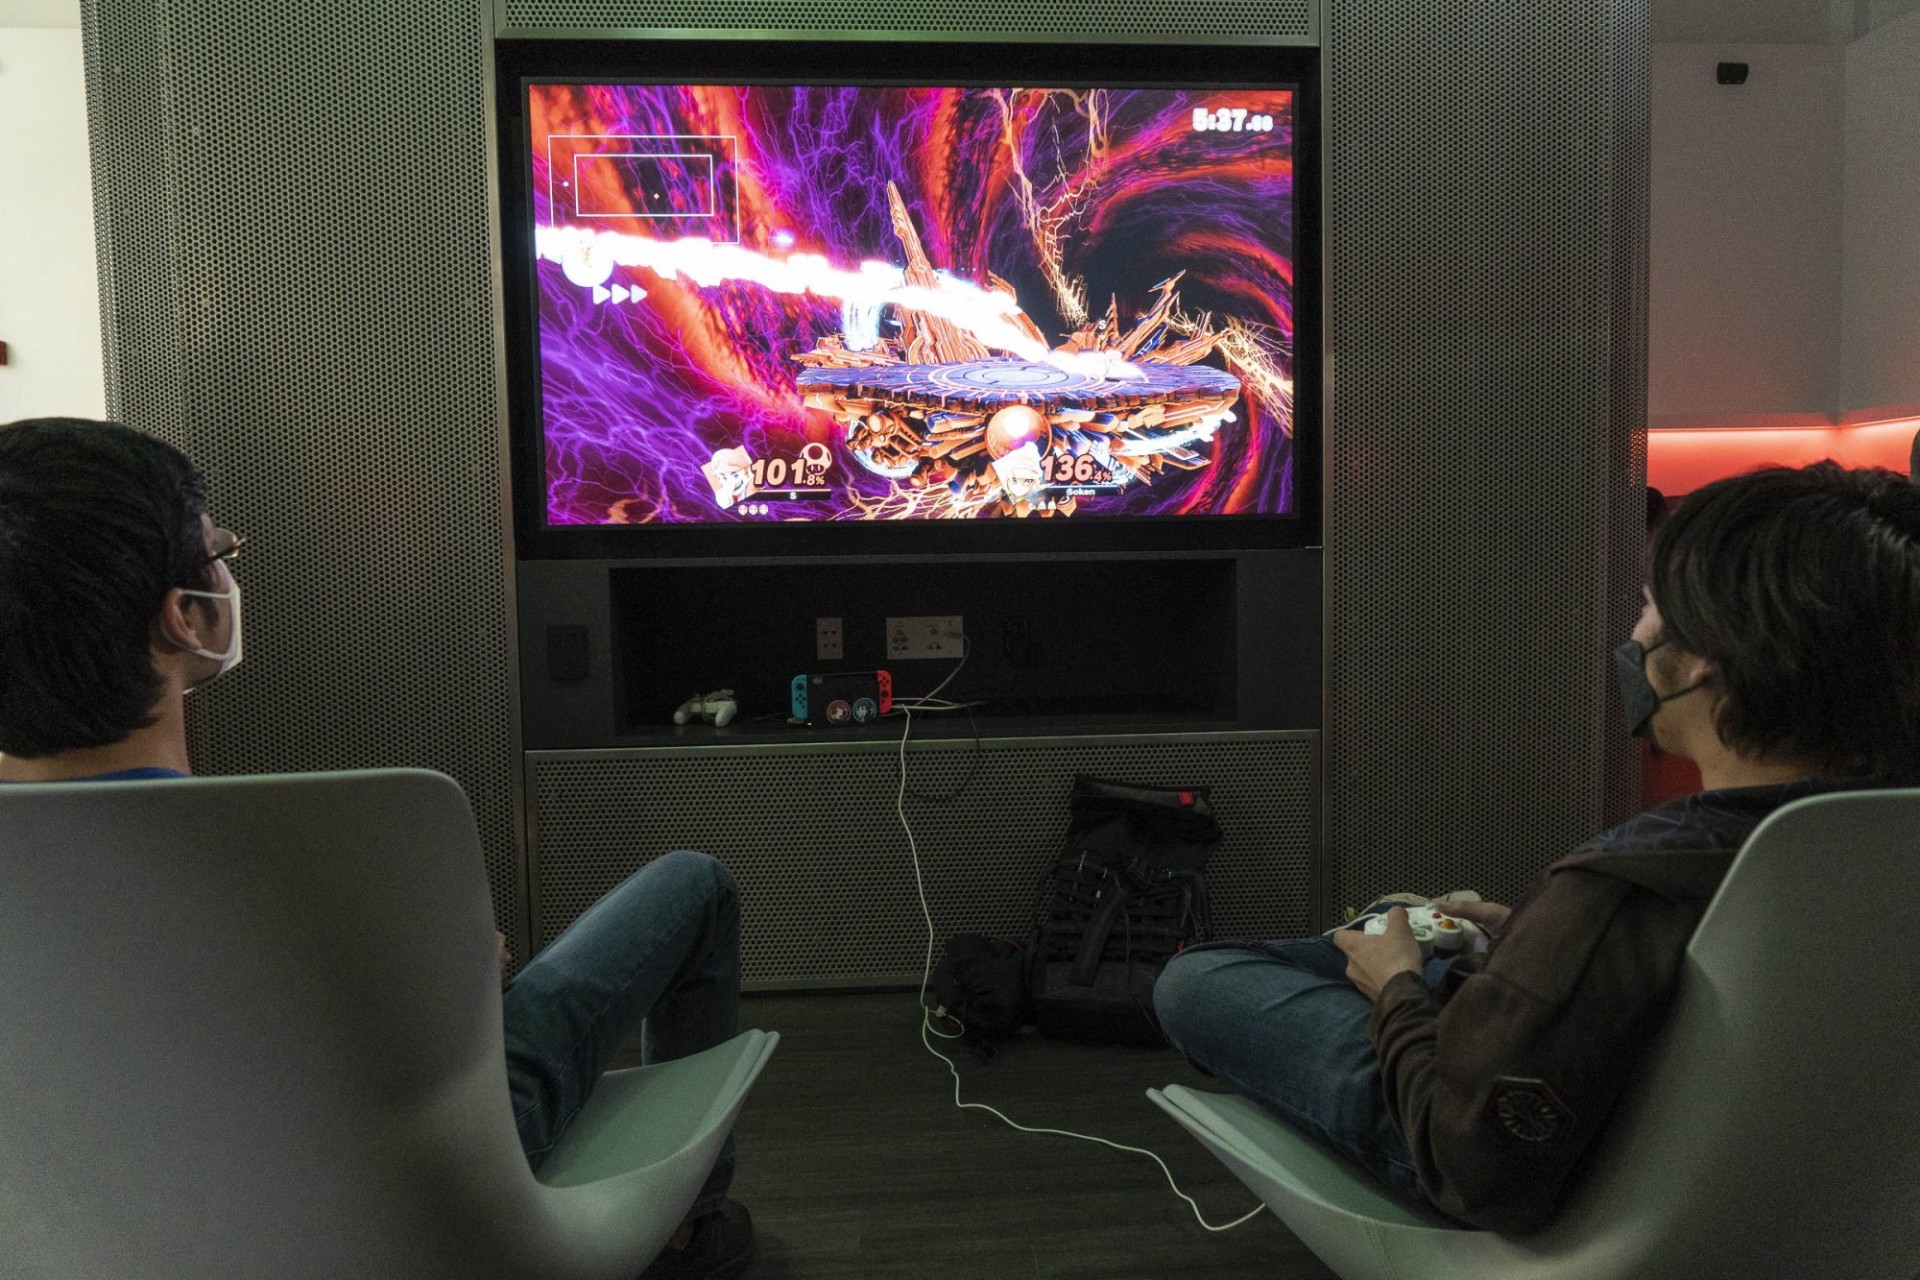 The room has two 75 inch 4K resolution screens with game system plug in capabilities. Photo by Barbara Alper